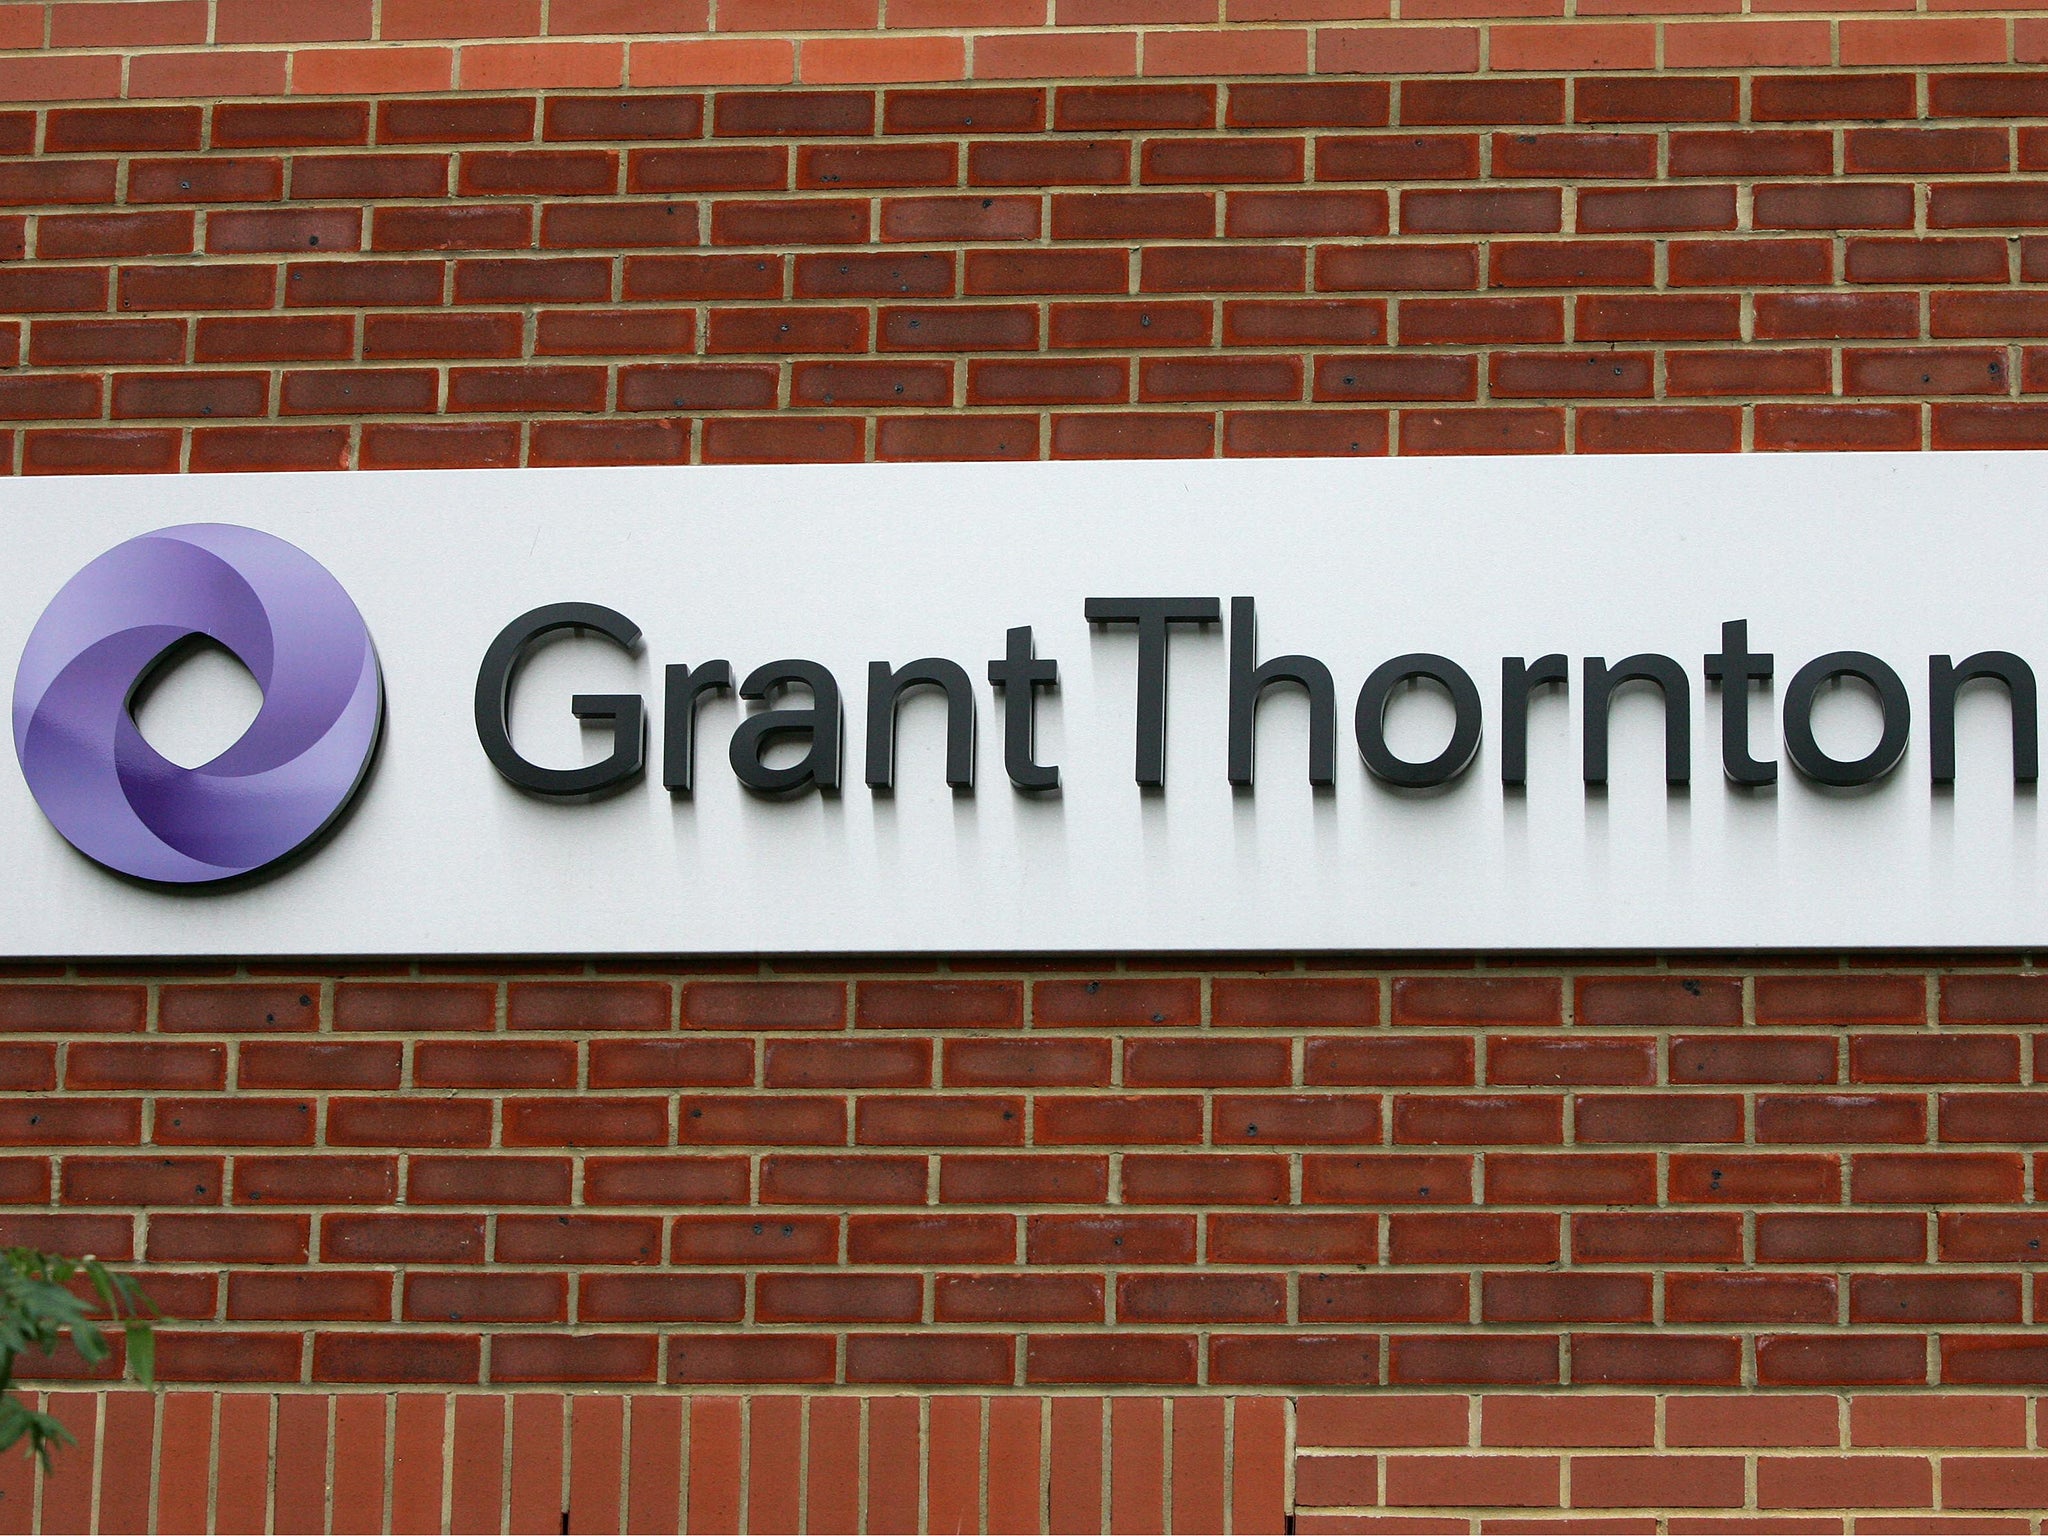 Grant Thornton is a limited liability partnership with 26 offices; its latest turnover was £512m